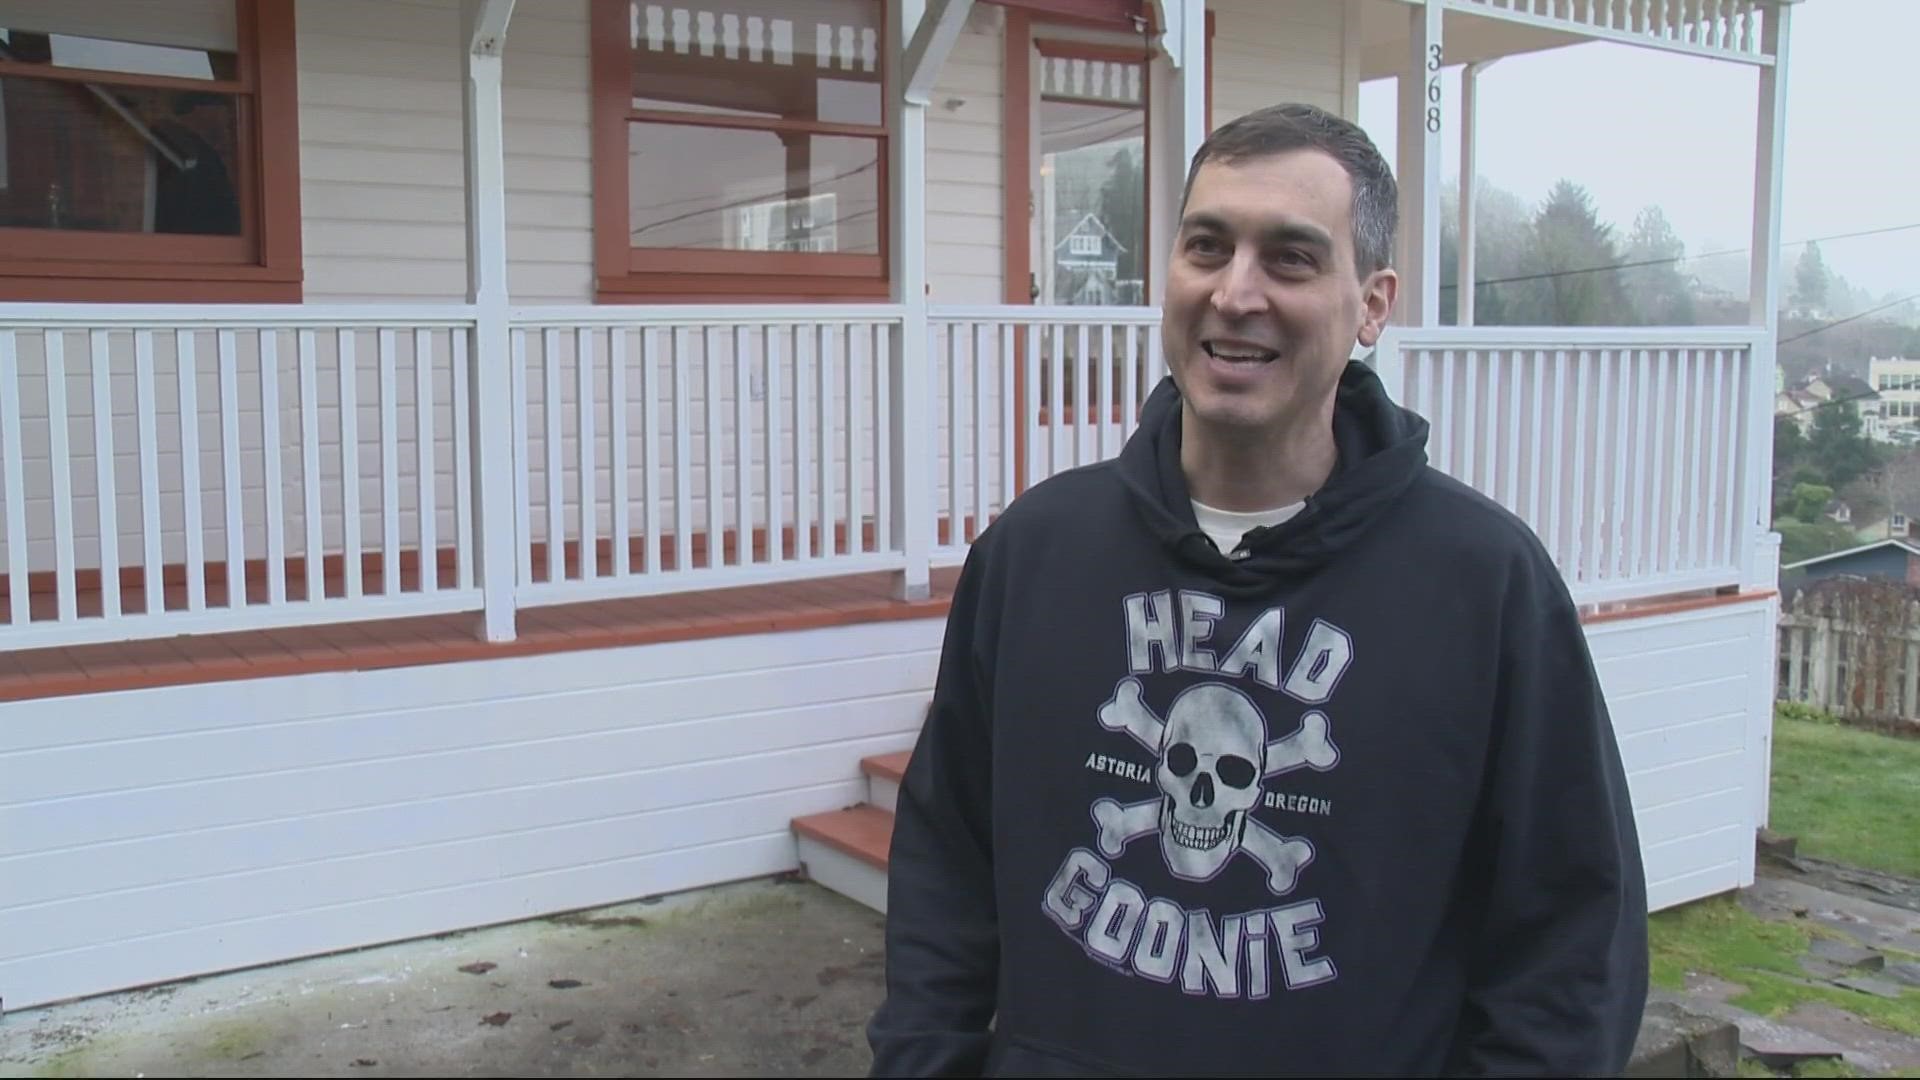 A Goonies superfan loved the movie so much that he bought the house where it was made. The owner gave KGW's Devon Haskins a tour.